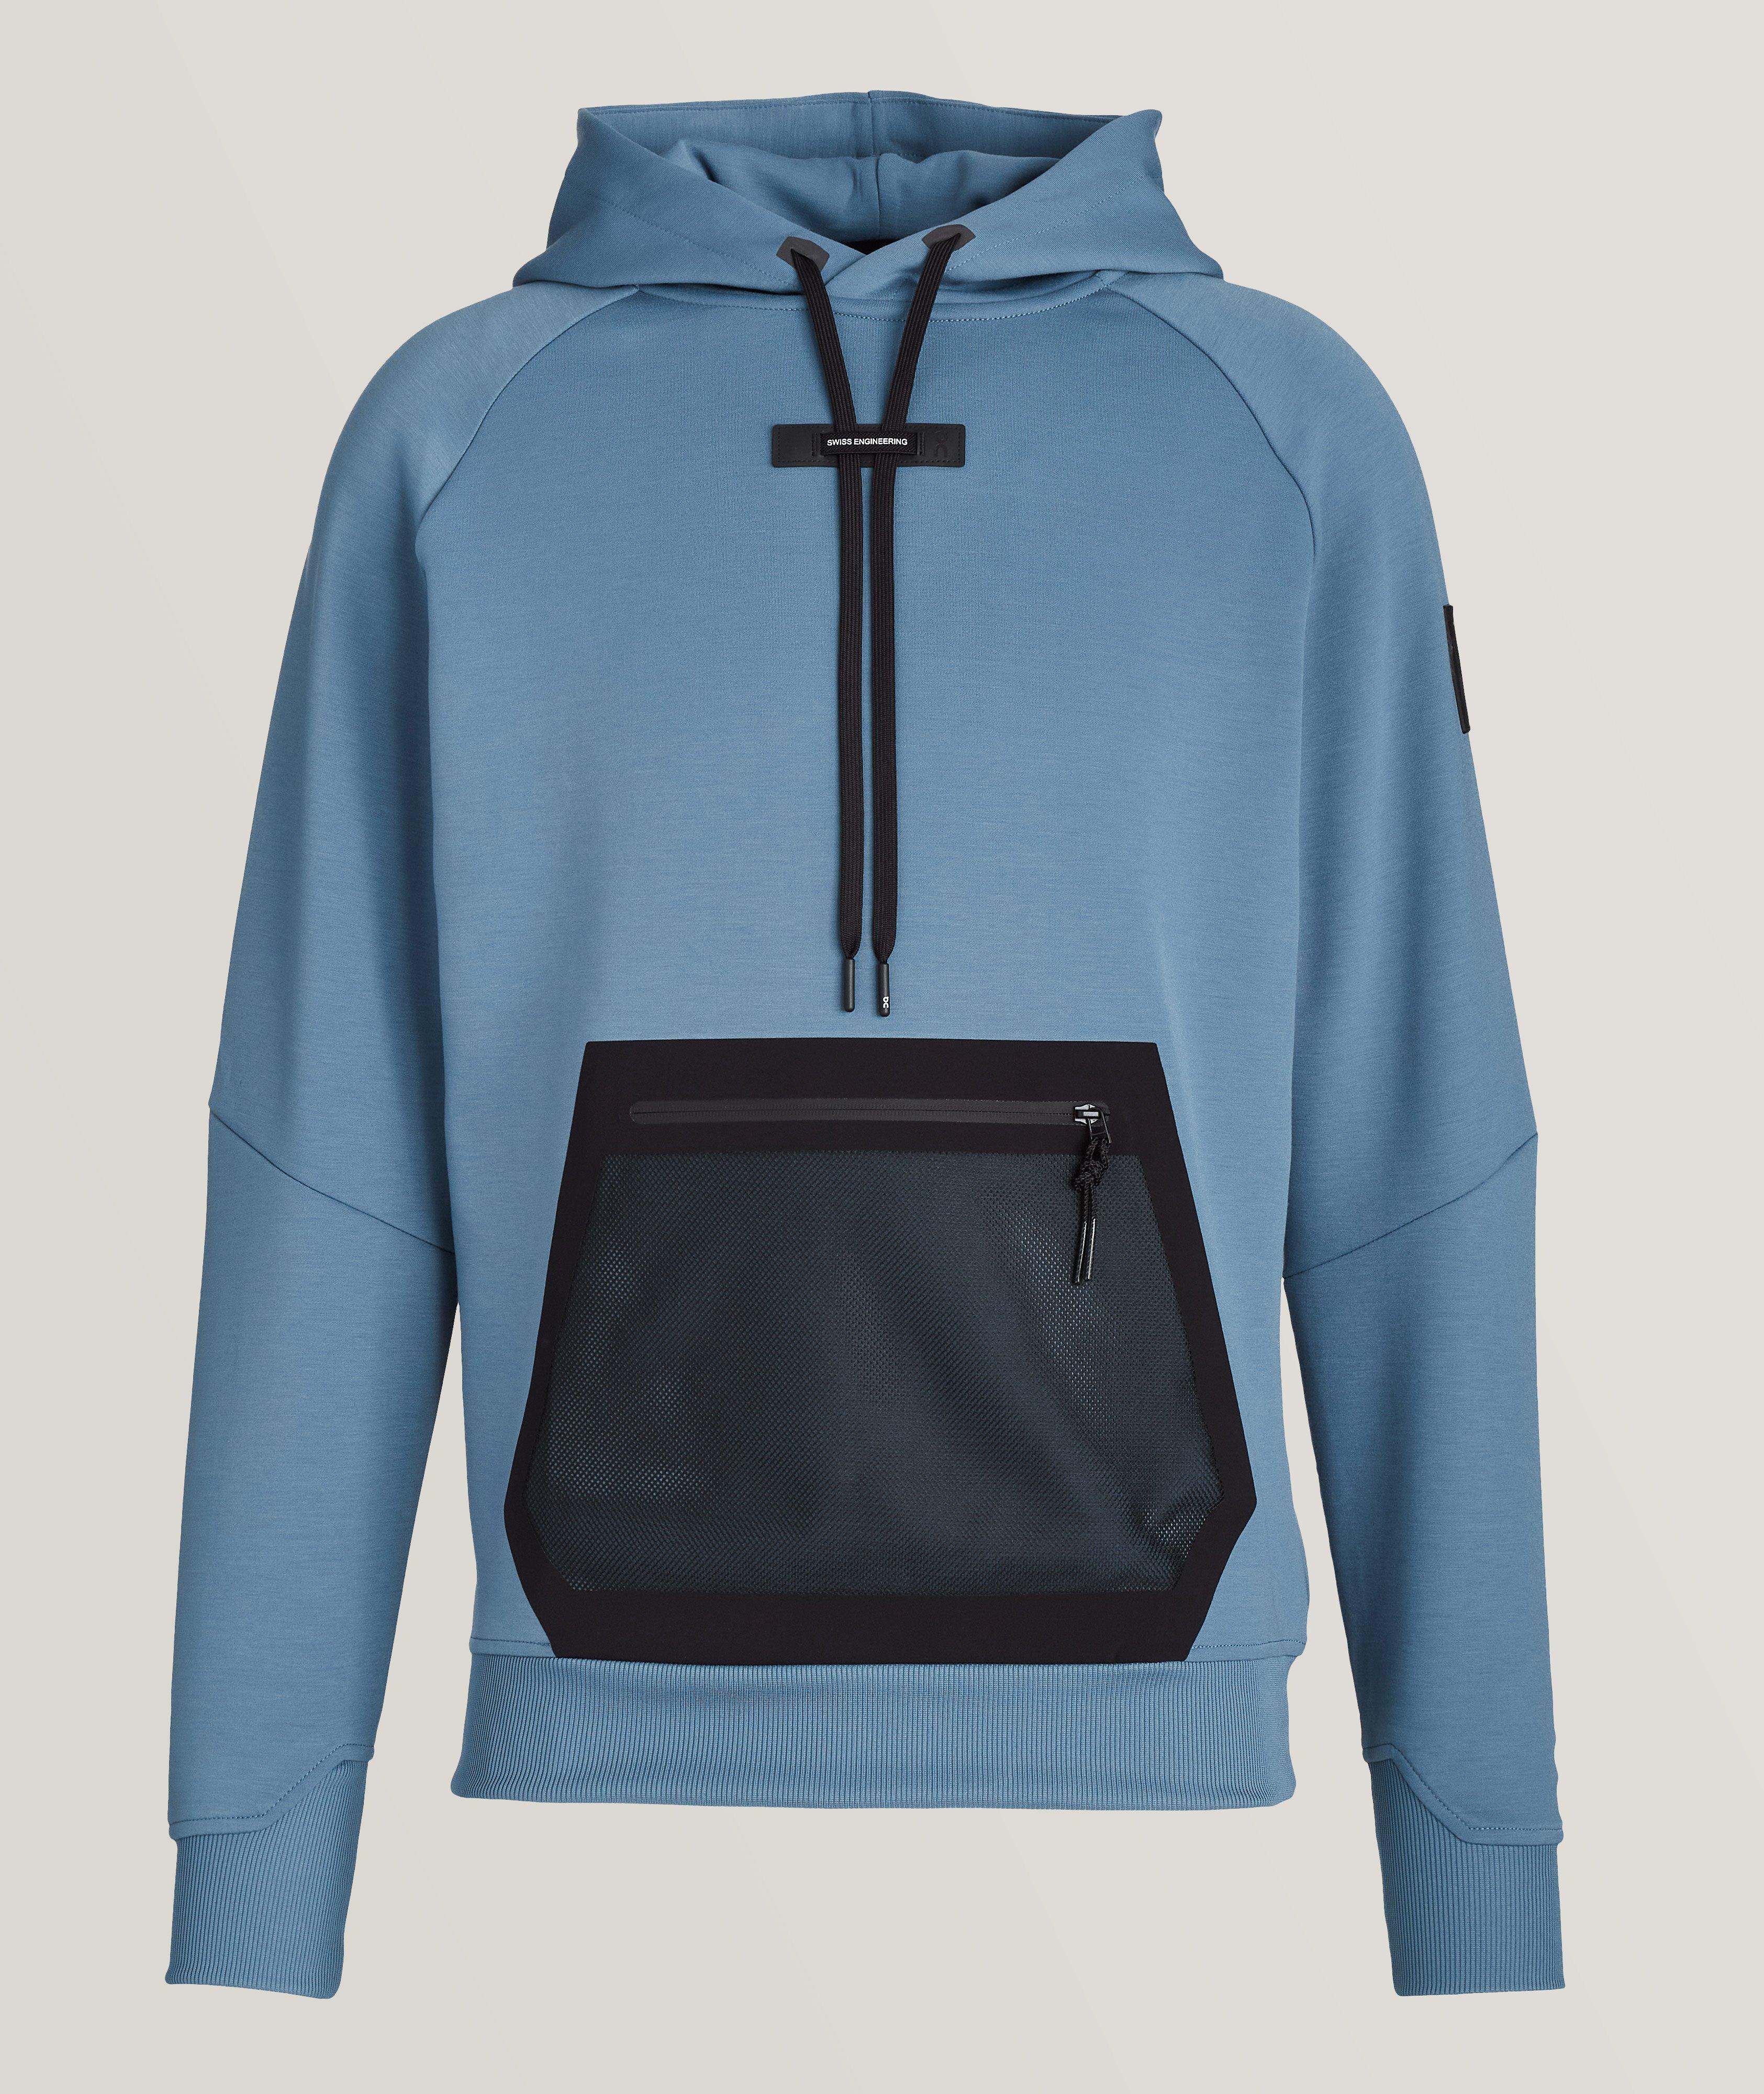 Recycled Material Performance Technical Hooded Sweater image 0